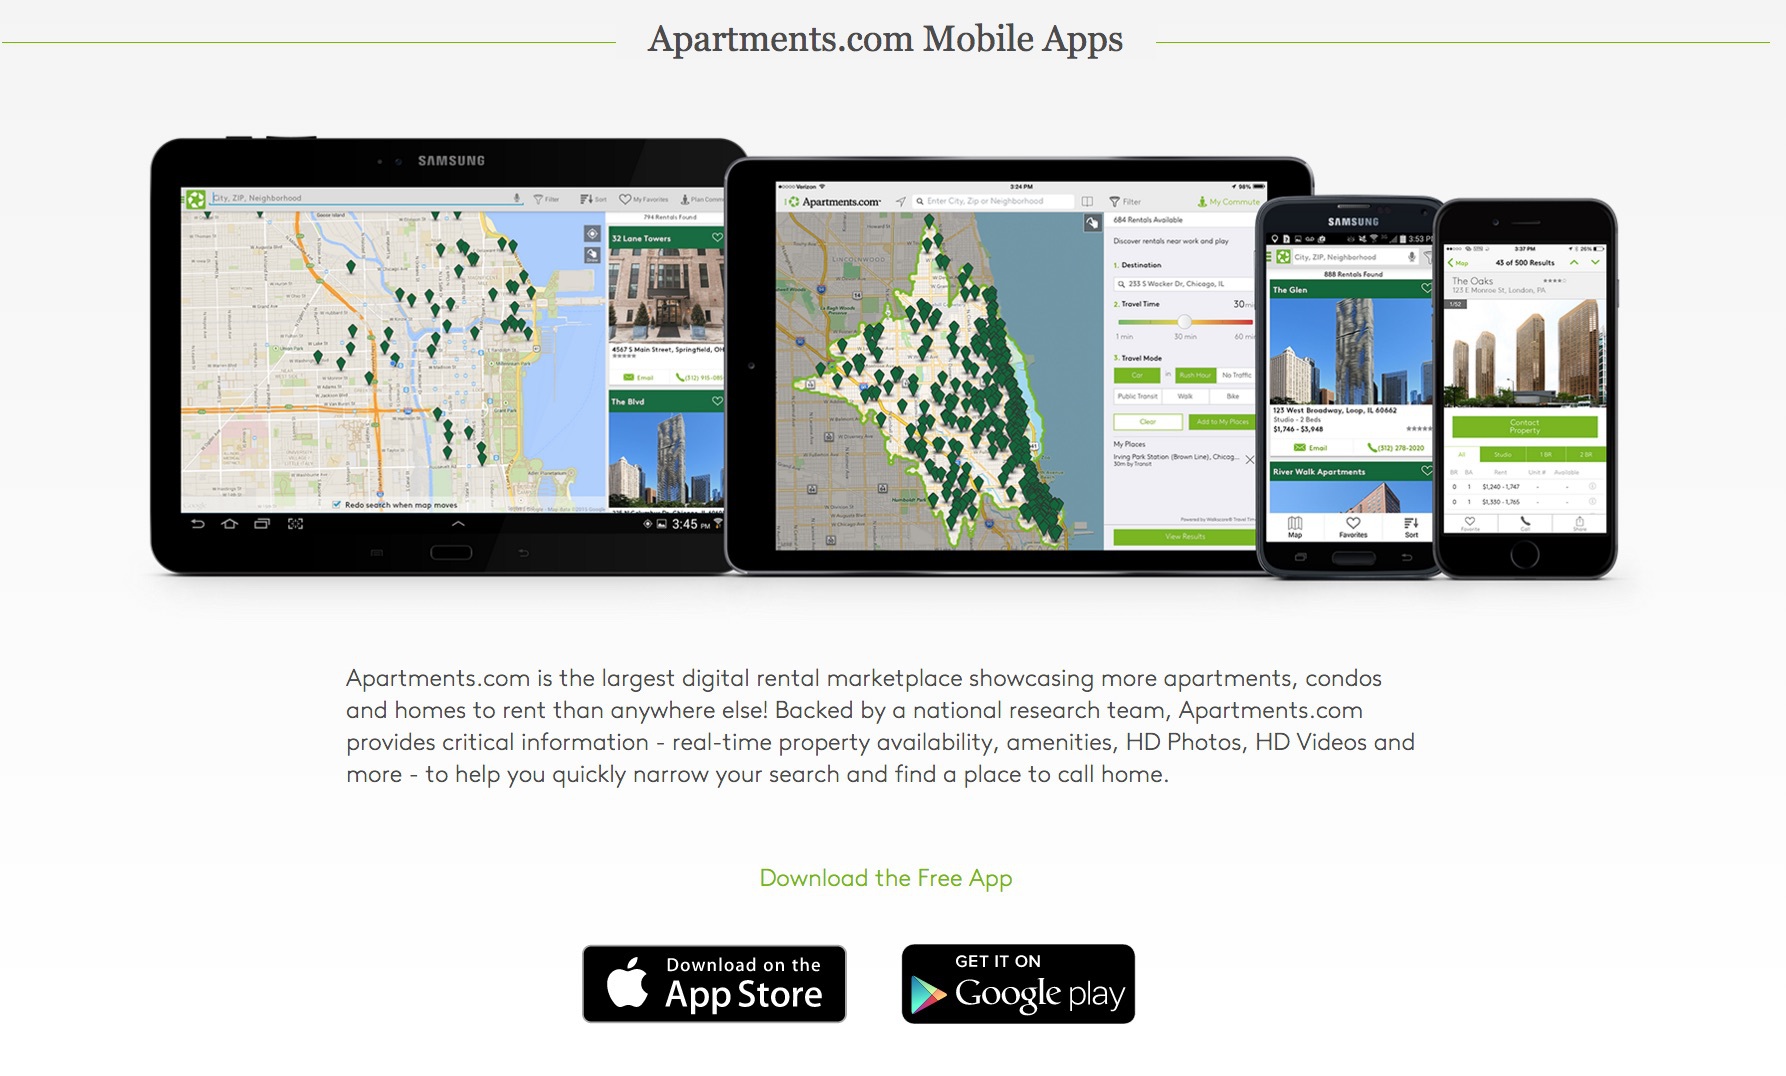 Apartment.com's mobile apps, in a screencap from the website.